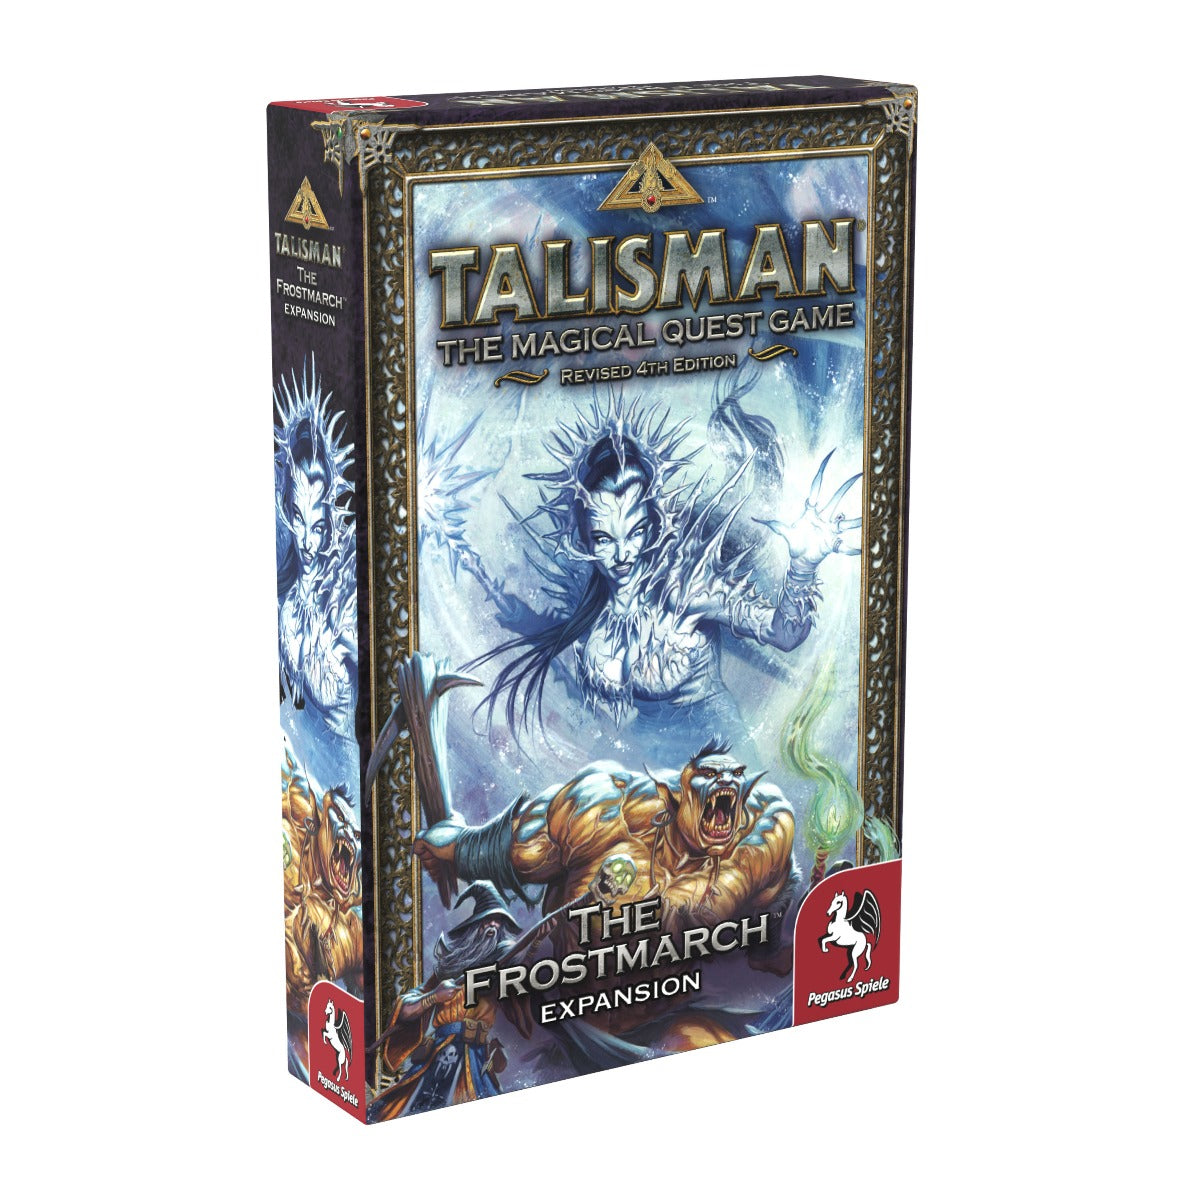 Talisman 4th ed., The Magical Quest Game, The Frostmarch, Expansion, Udvidelse, Pegasus Spiele, Eventyr, Adventure